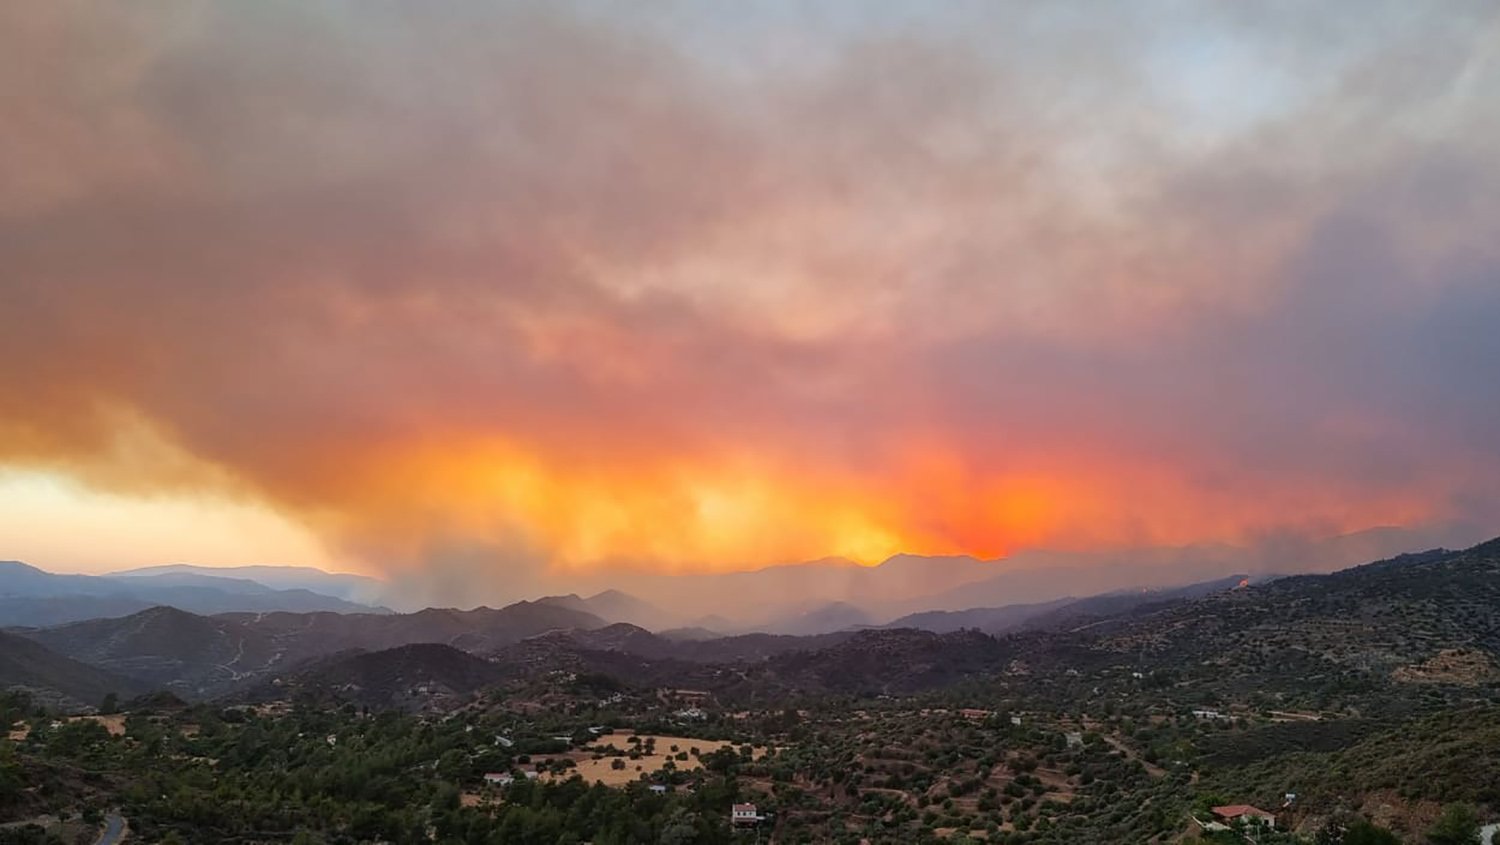 image Our View: Devastating fire risk is real and we must be better prepared